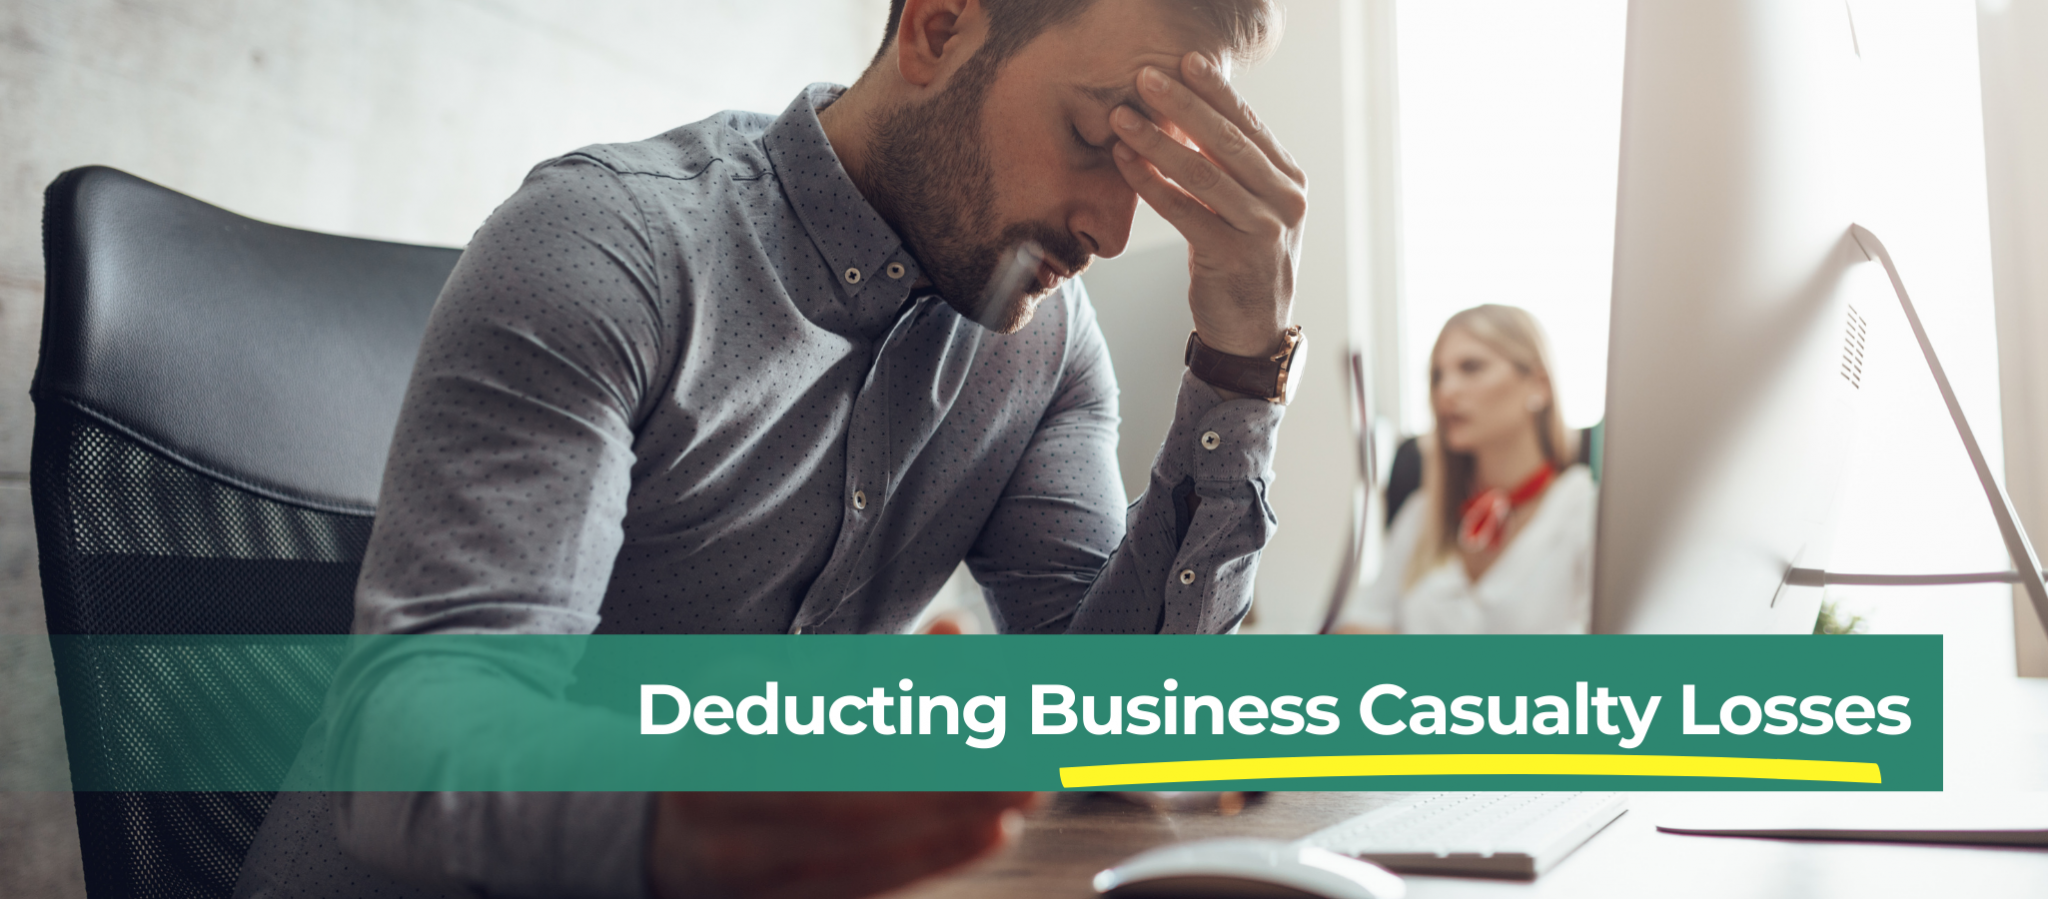 Deducting Business Casualty Losses You Don’t Need a Disaster